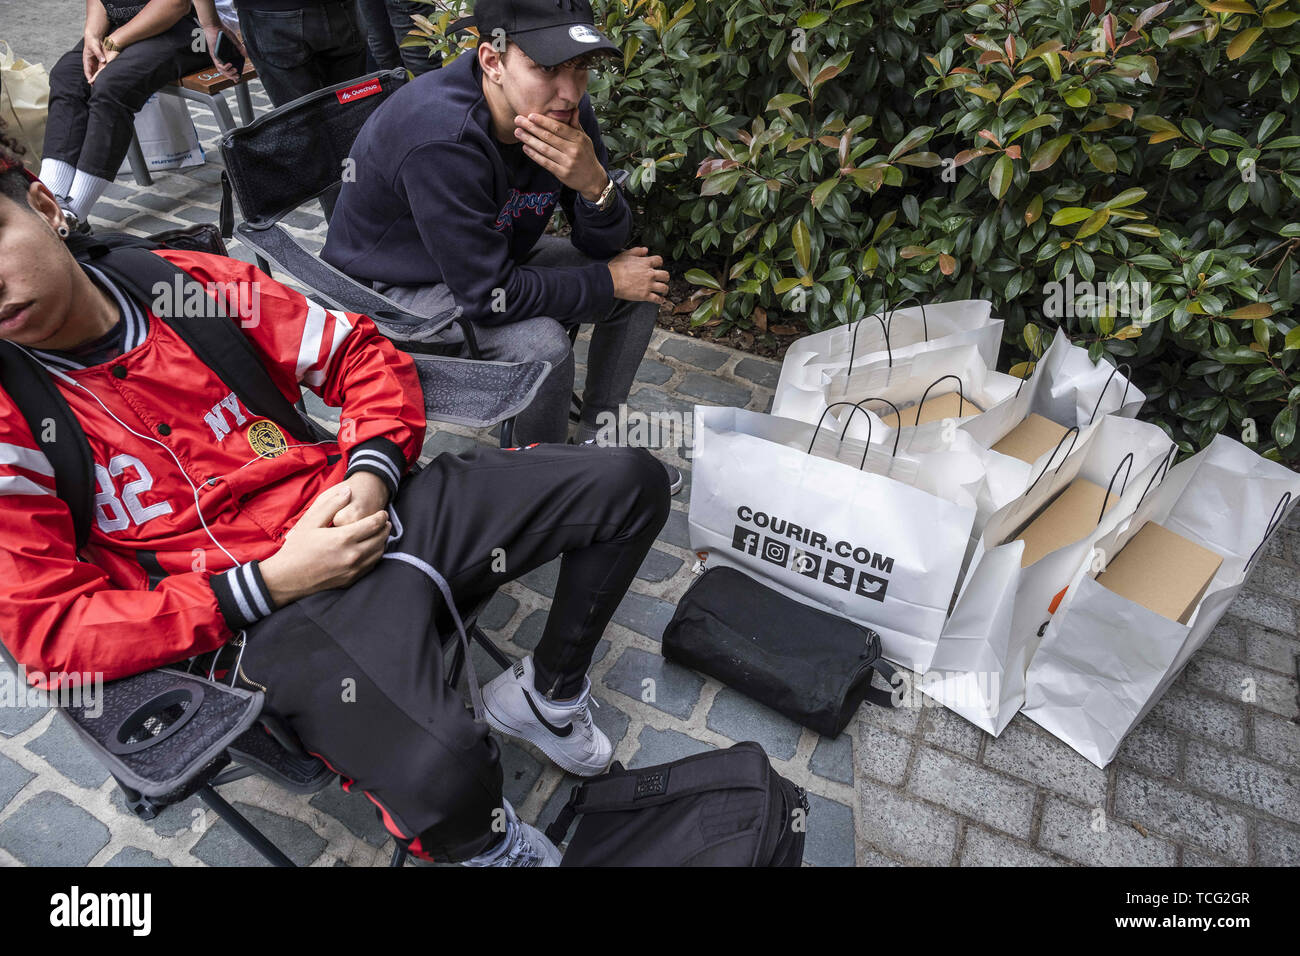 Barcelona, Catalonia, Spain. 7th June, 2019. Two young men seated with  their shopping bags containing the new Adidas Yeezy Boost 350 shoe model  designed by Kanye West.The German manufacturer of sports shoes